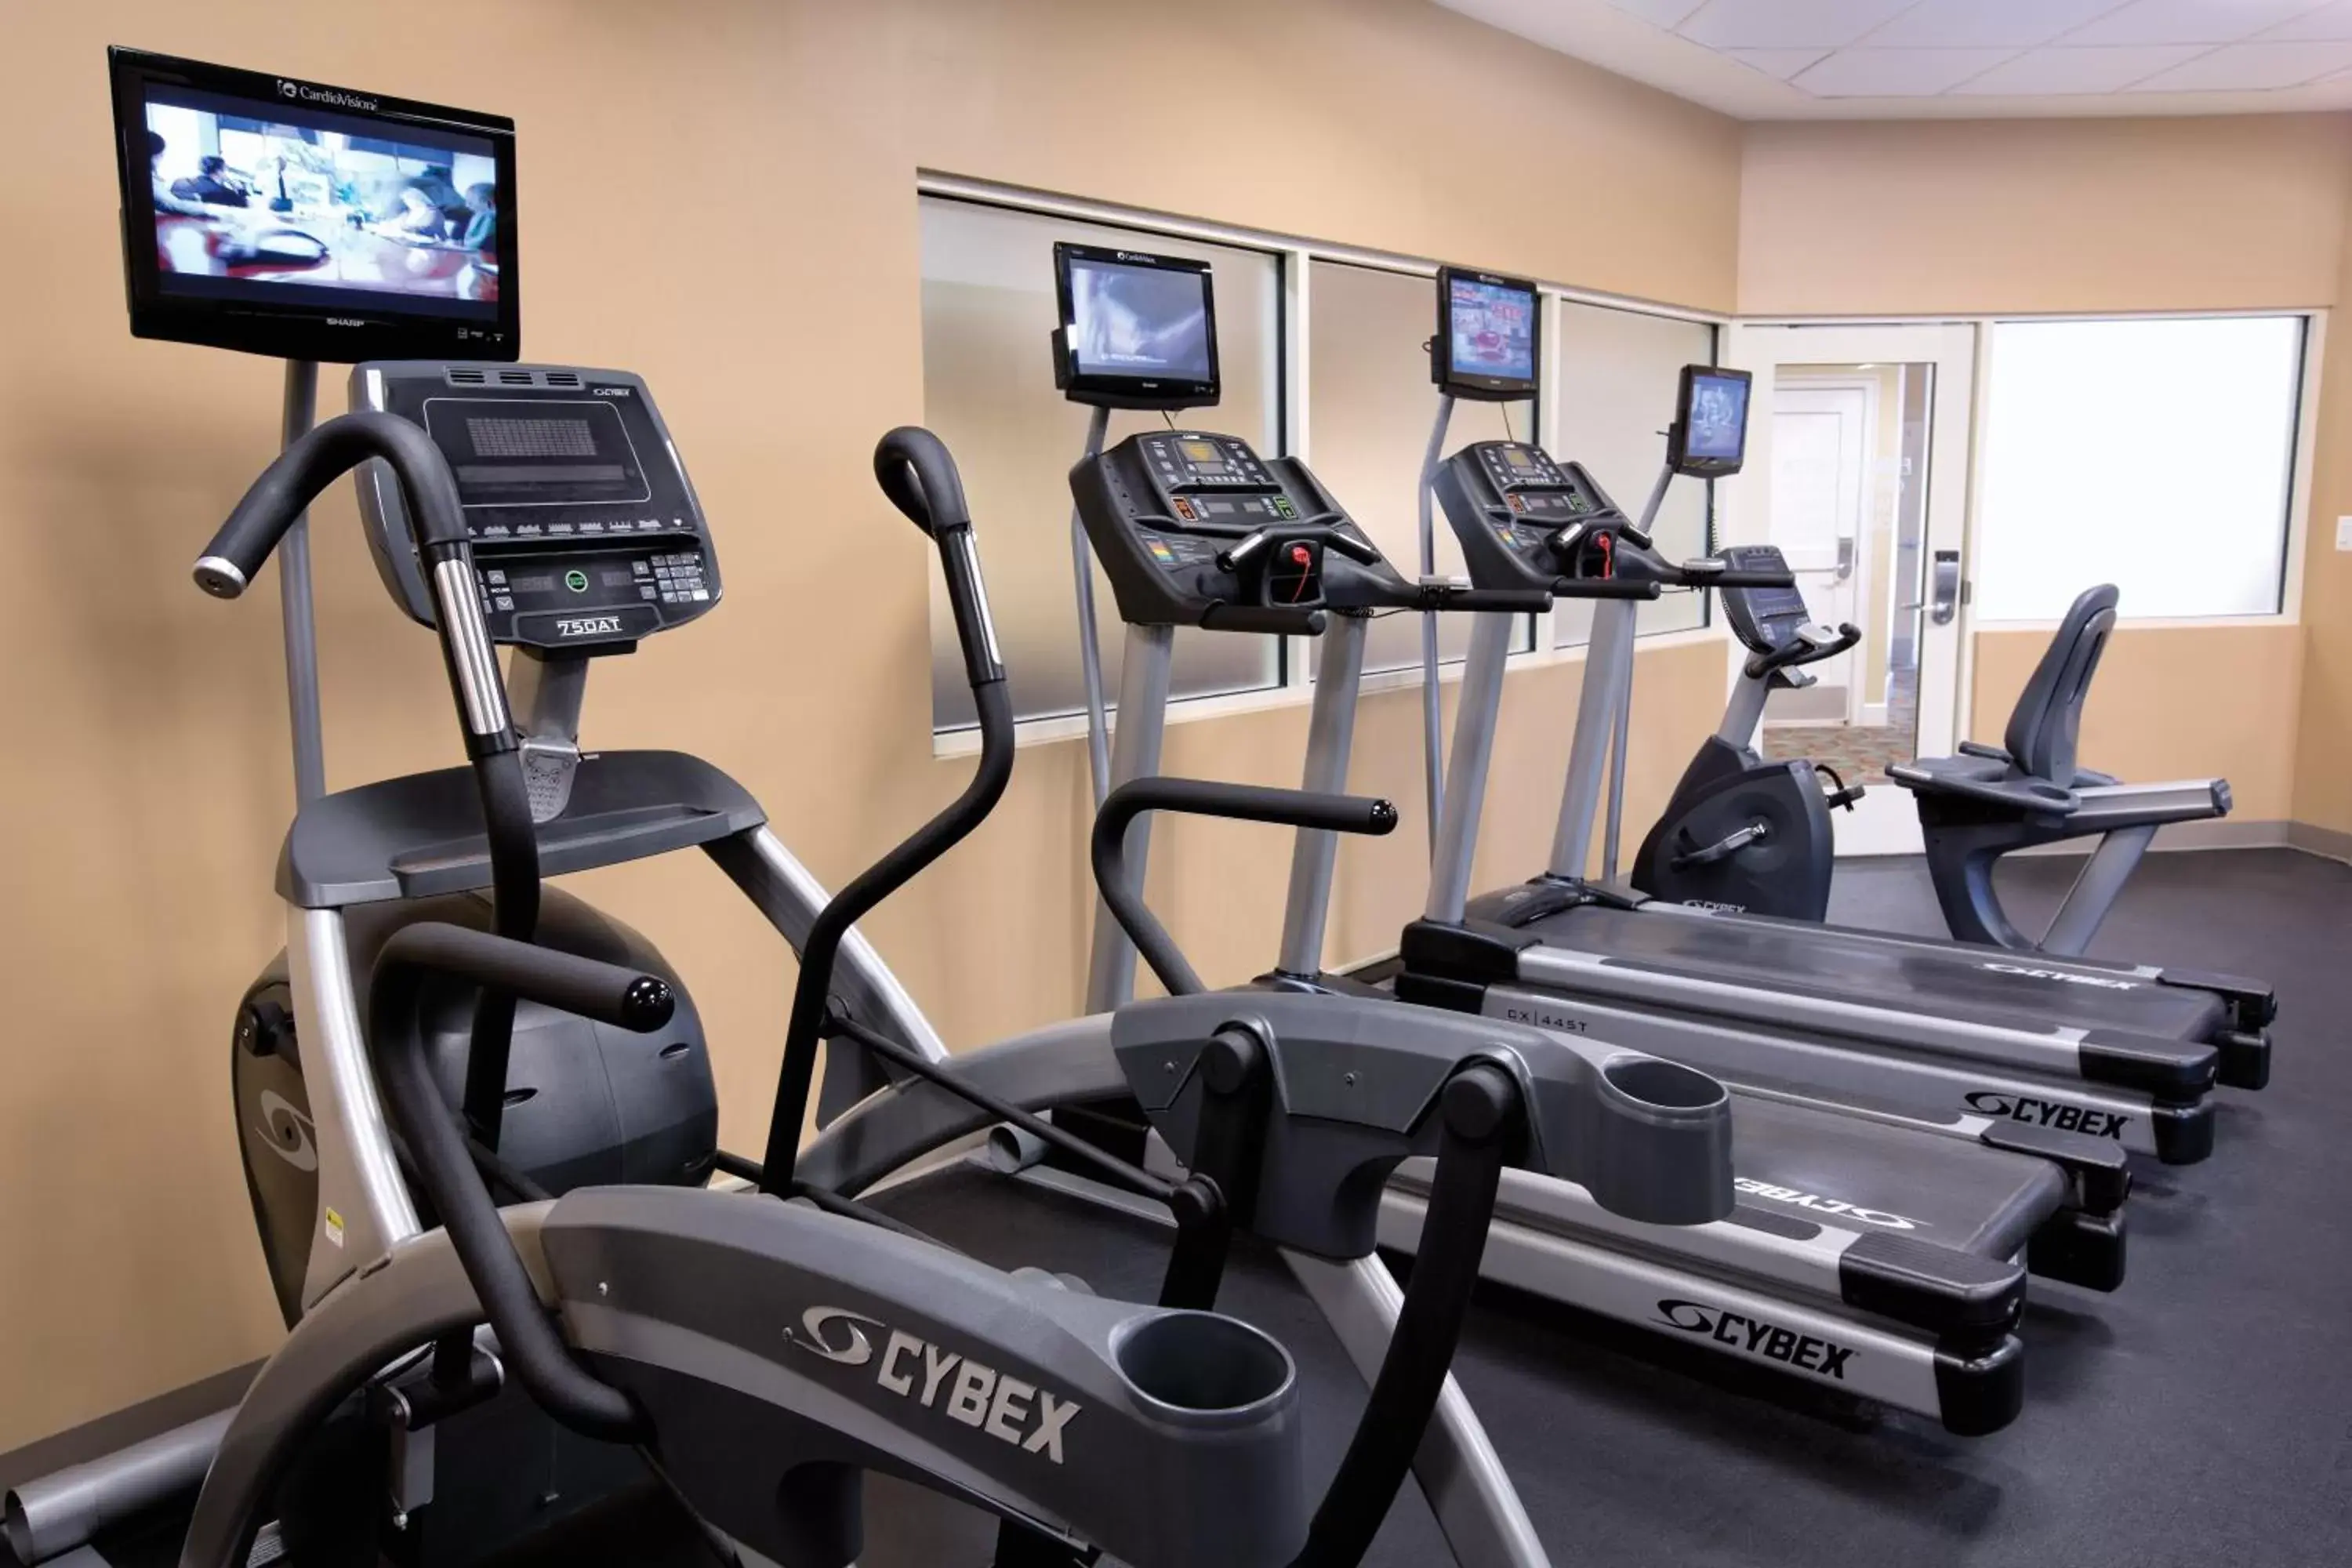 Fitness centre/facilities in Club Wyndham National Harbor